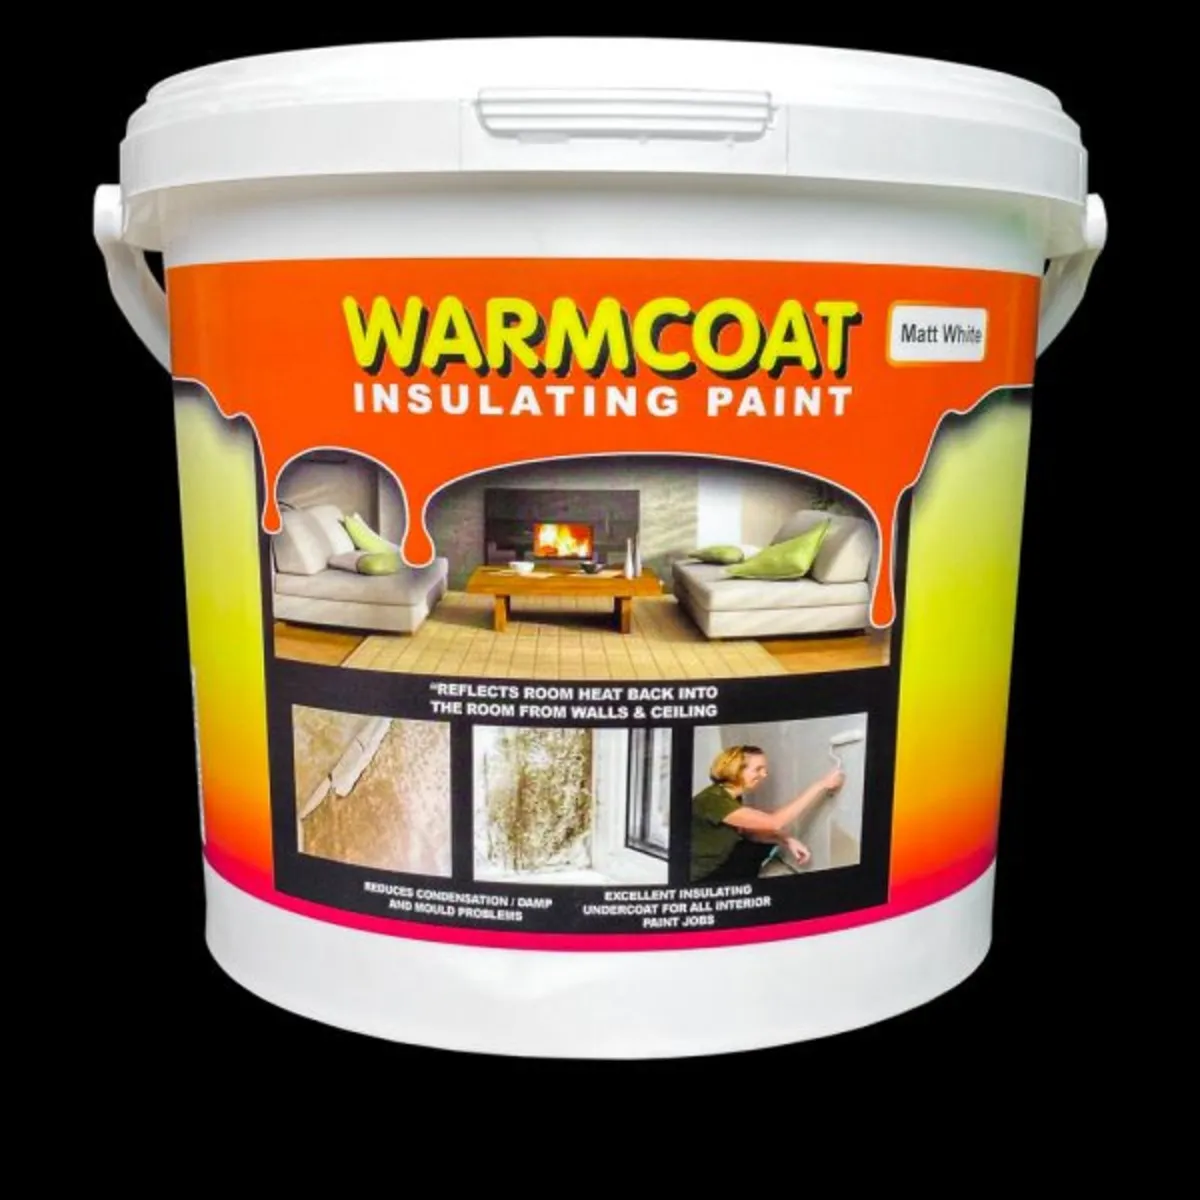 WARMCOAT INSULATING PAINT